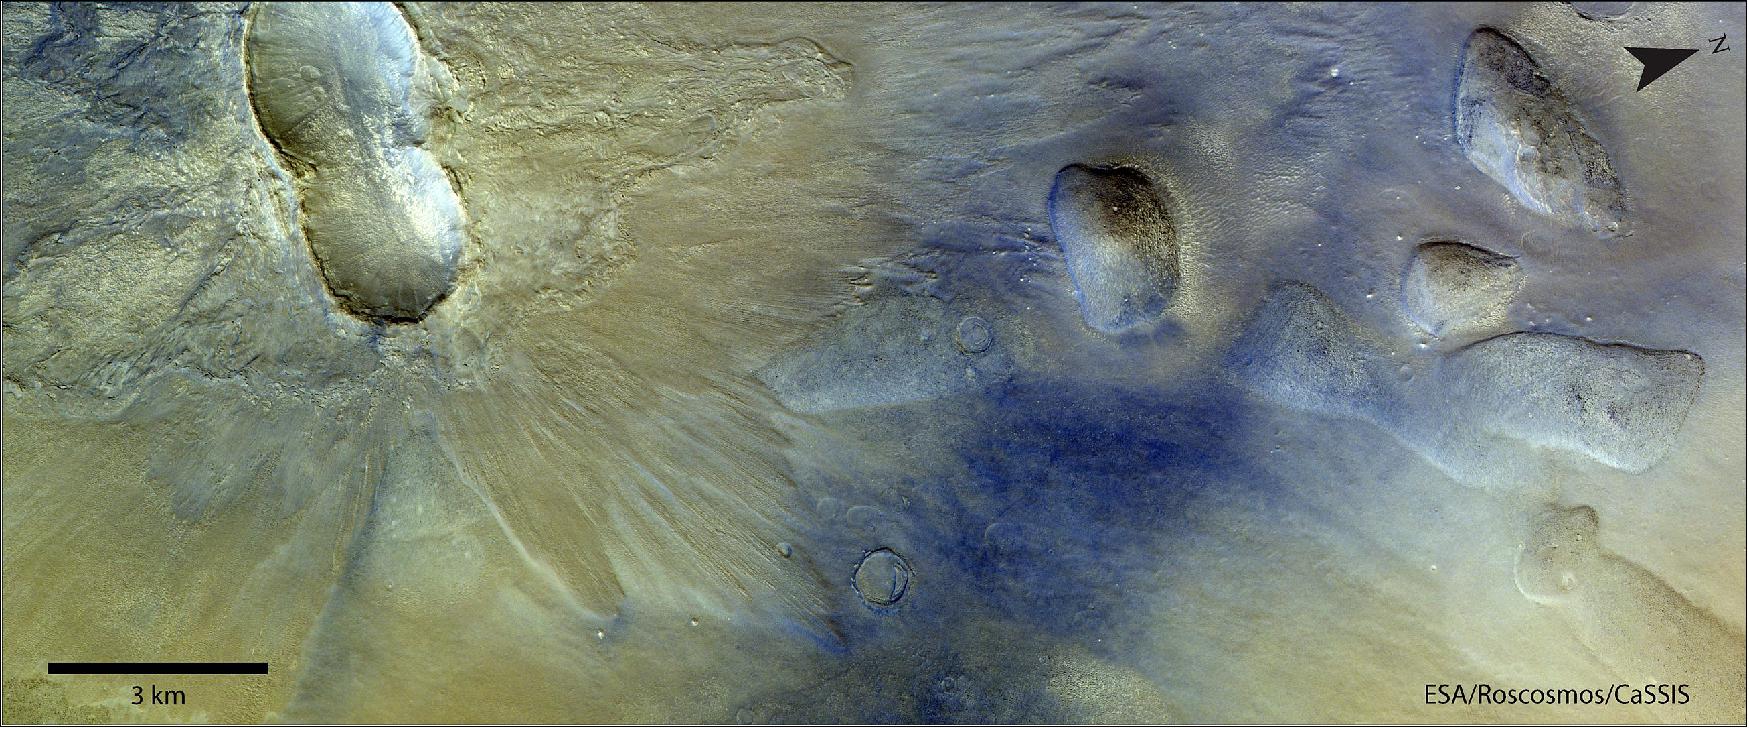 Figure 17: The crater duo is located in an otherwise smooth plain of Arcadia Planitia [39.1ºN/174.8ºE]. Double craters like these are formed when two meteorites impact the surface simultaneously and in very close proximity. The two impactors would have originated from the same object that broke apart when it entered the martian atmosphere. The two craters are of similar size, which means that the two projectiles were approximately the same size as well (image credit: ESA/Roscosmos/CaSSIS, CC BY-SA 3.0 IGO)